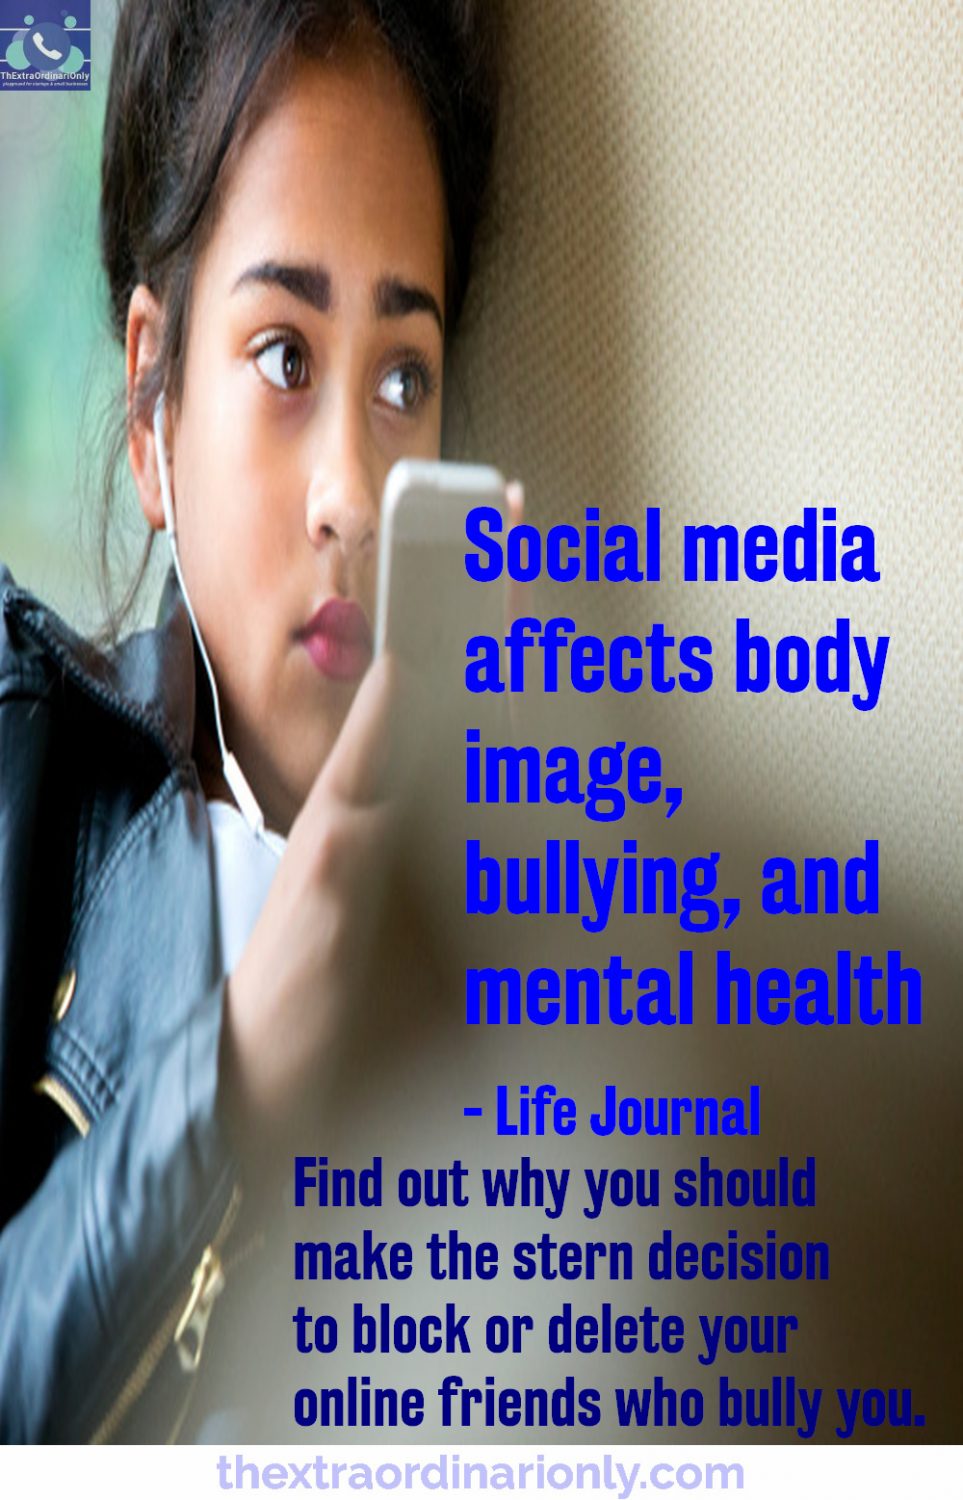 social media affects body image bullying and mental health